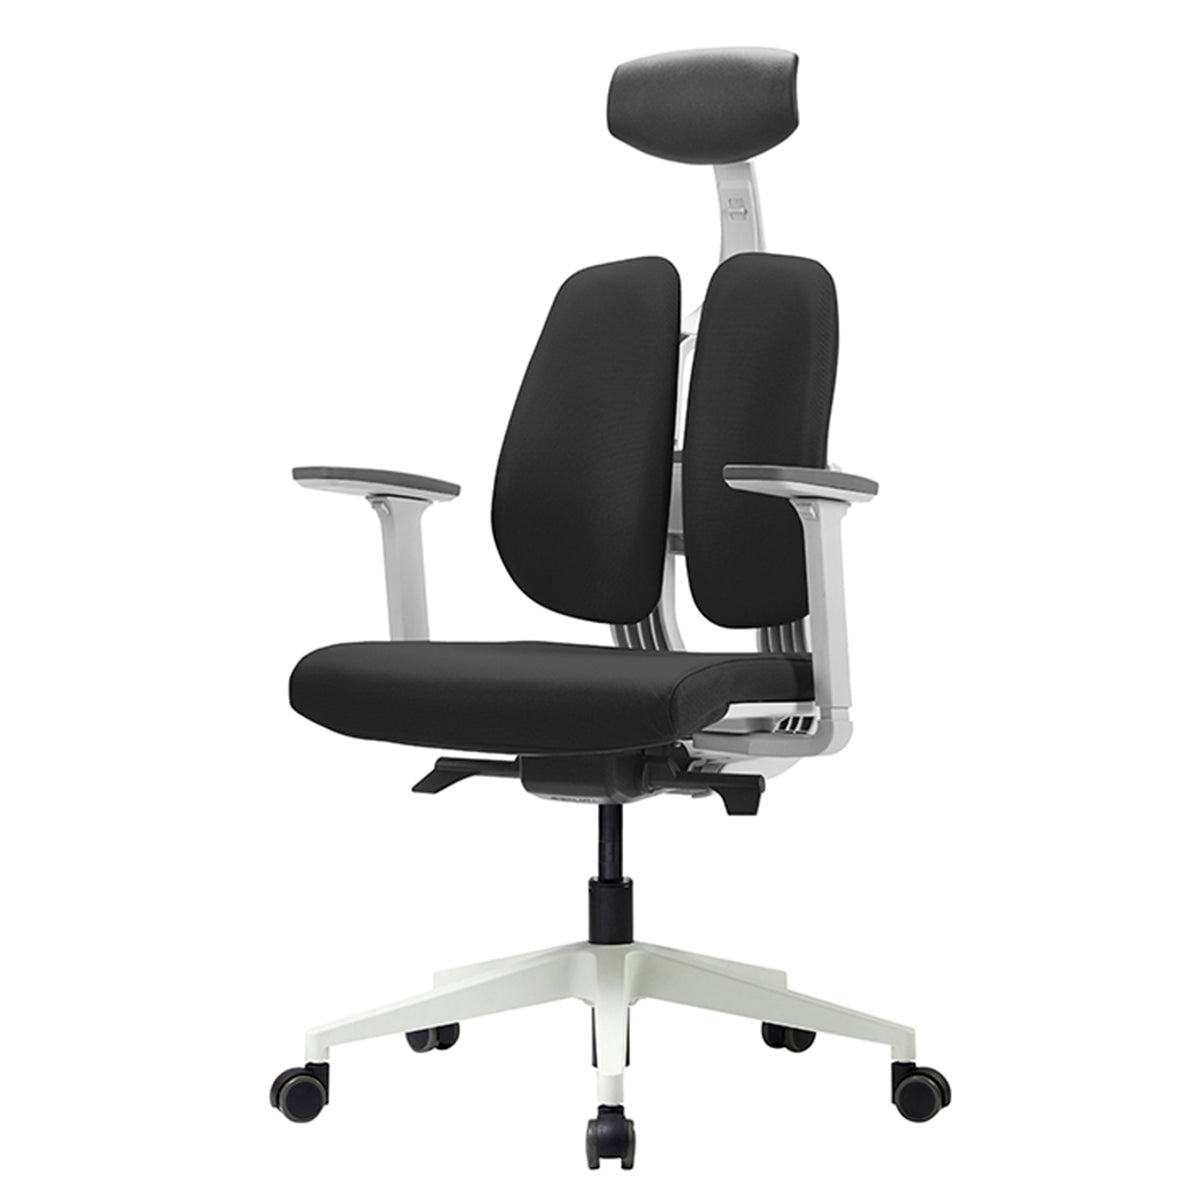 DUOREST DUOTEX Collection Office Home Award Winning Ergonomic Chair, White Frame - D2-200W-TS138